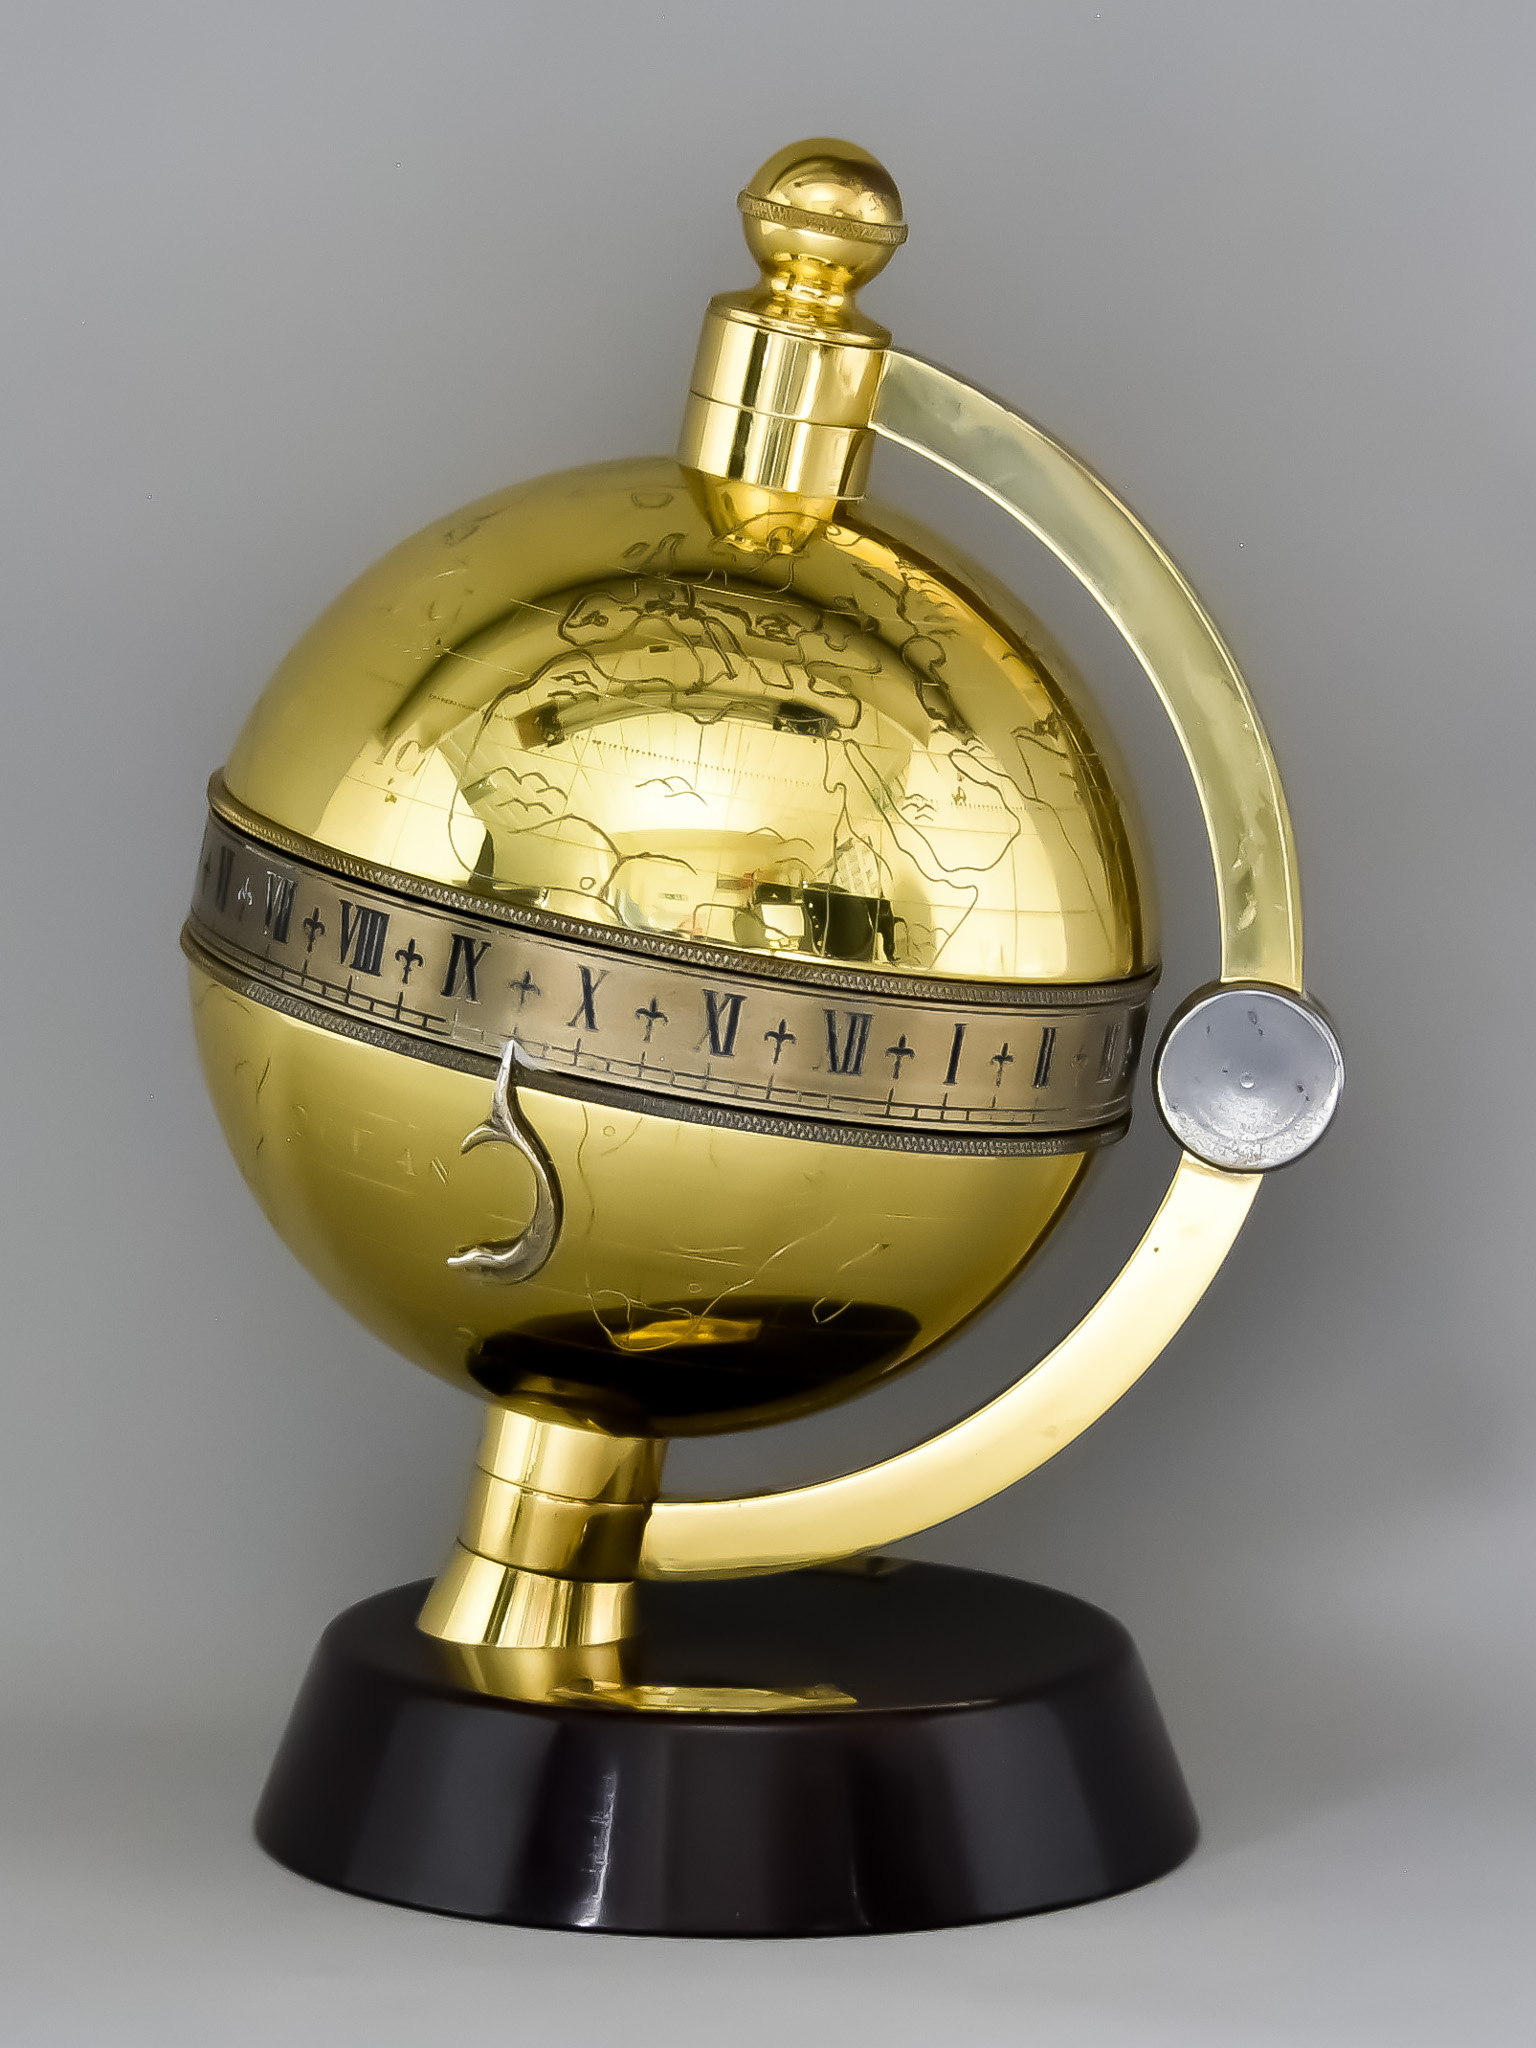 The Globe Clock by Charles Frodsham & Co., London, The Heritage Collection, No.194 of a limited